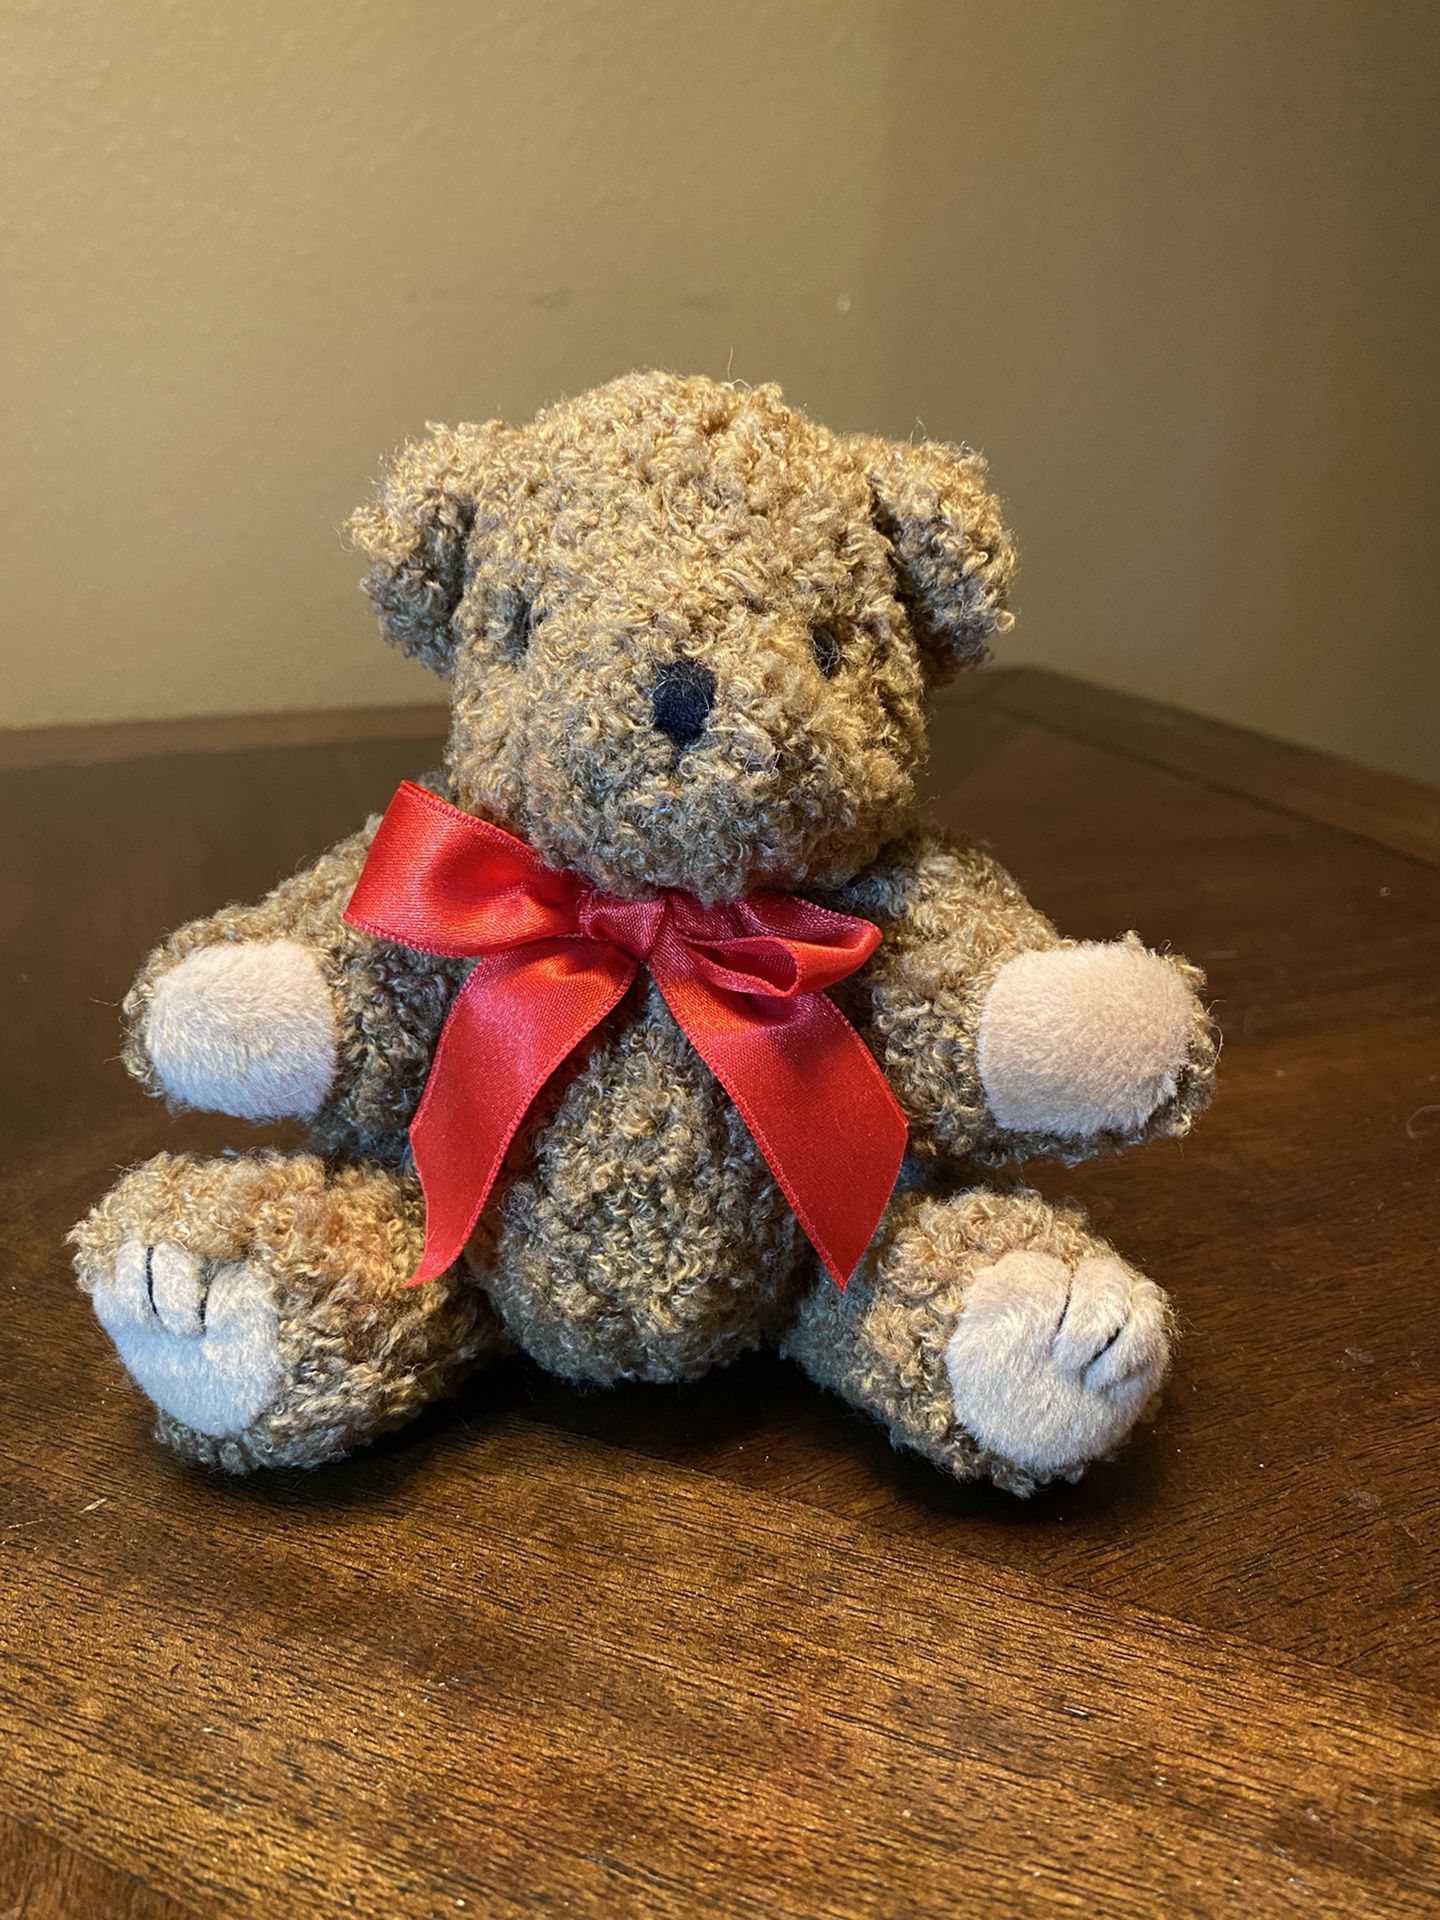 Sitting teddy bear with red bow